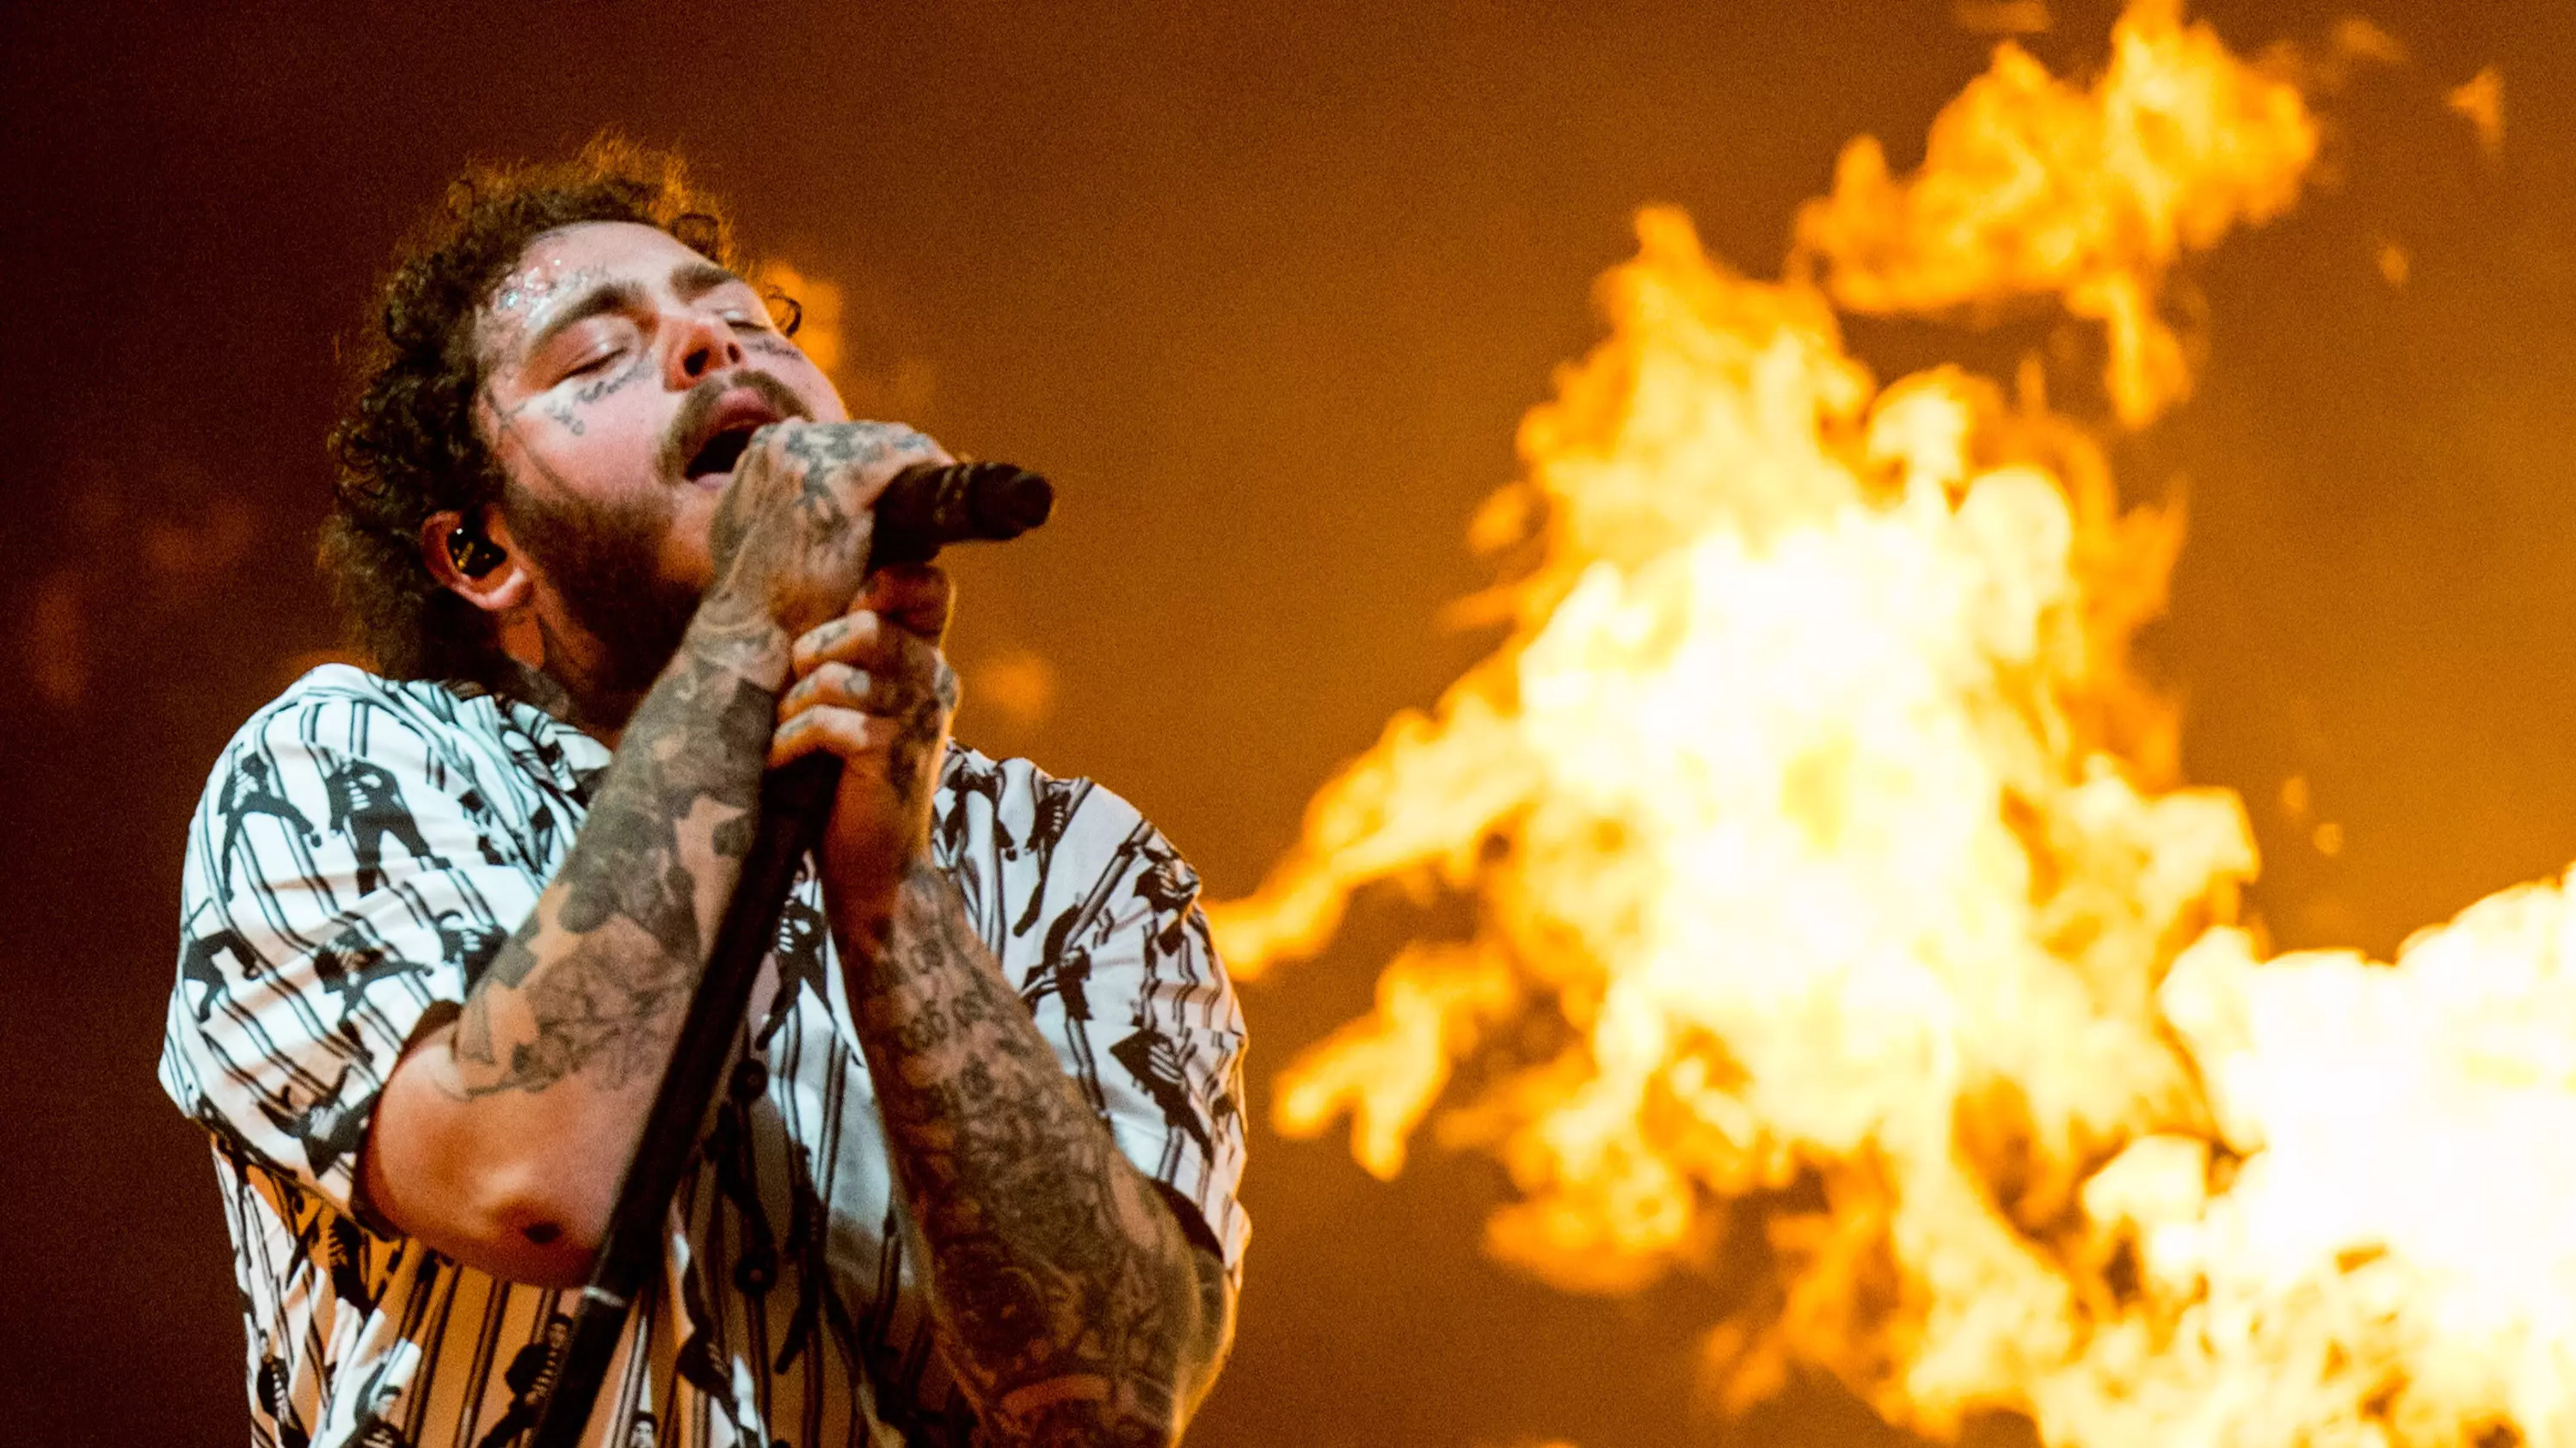 Post Malone's New Album Hollywood Bleeding Released Today Featuring Ozzy Osbourne And Travis Scott